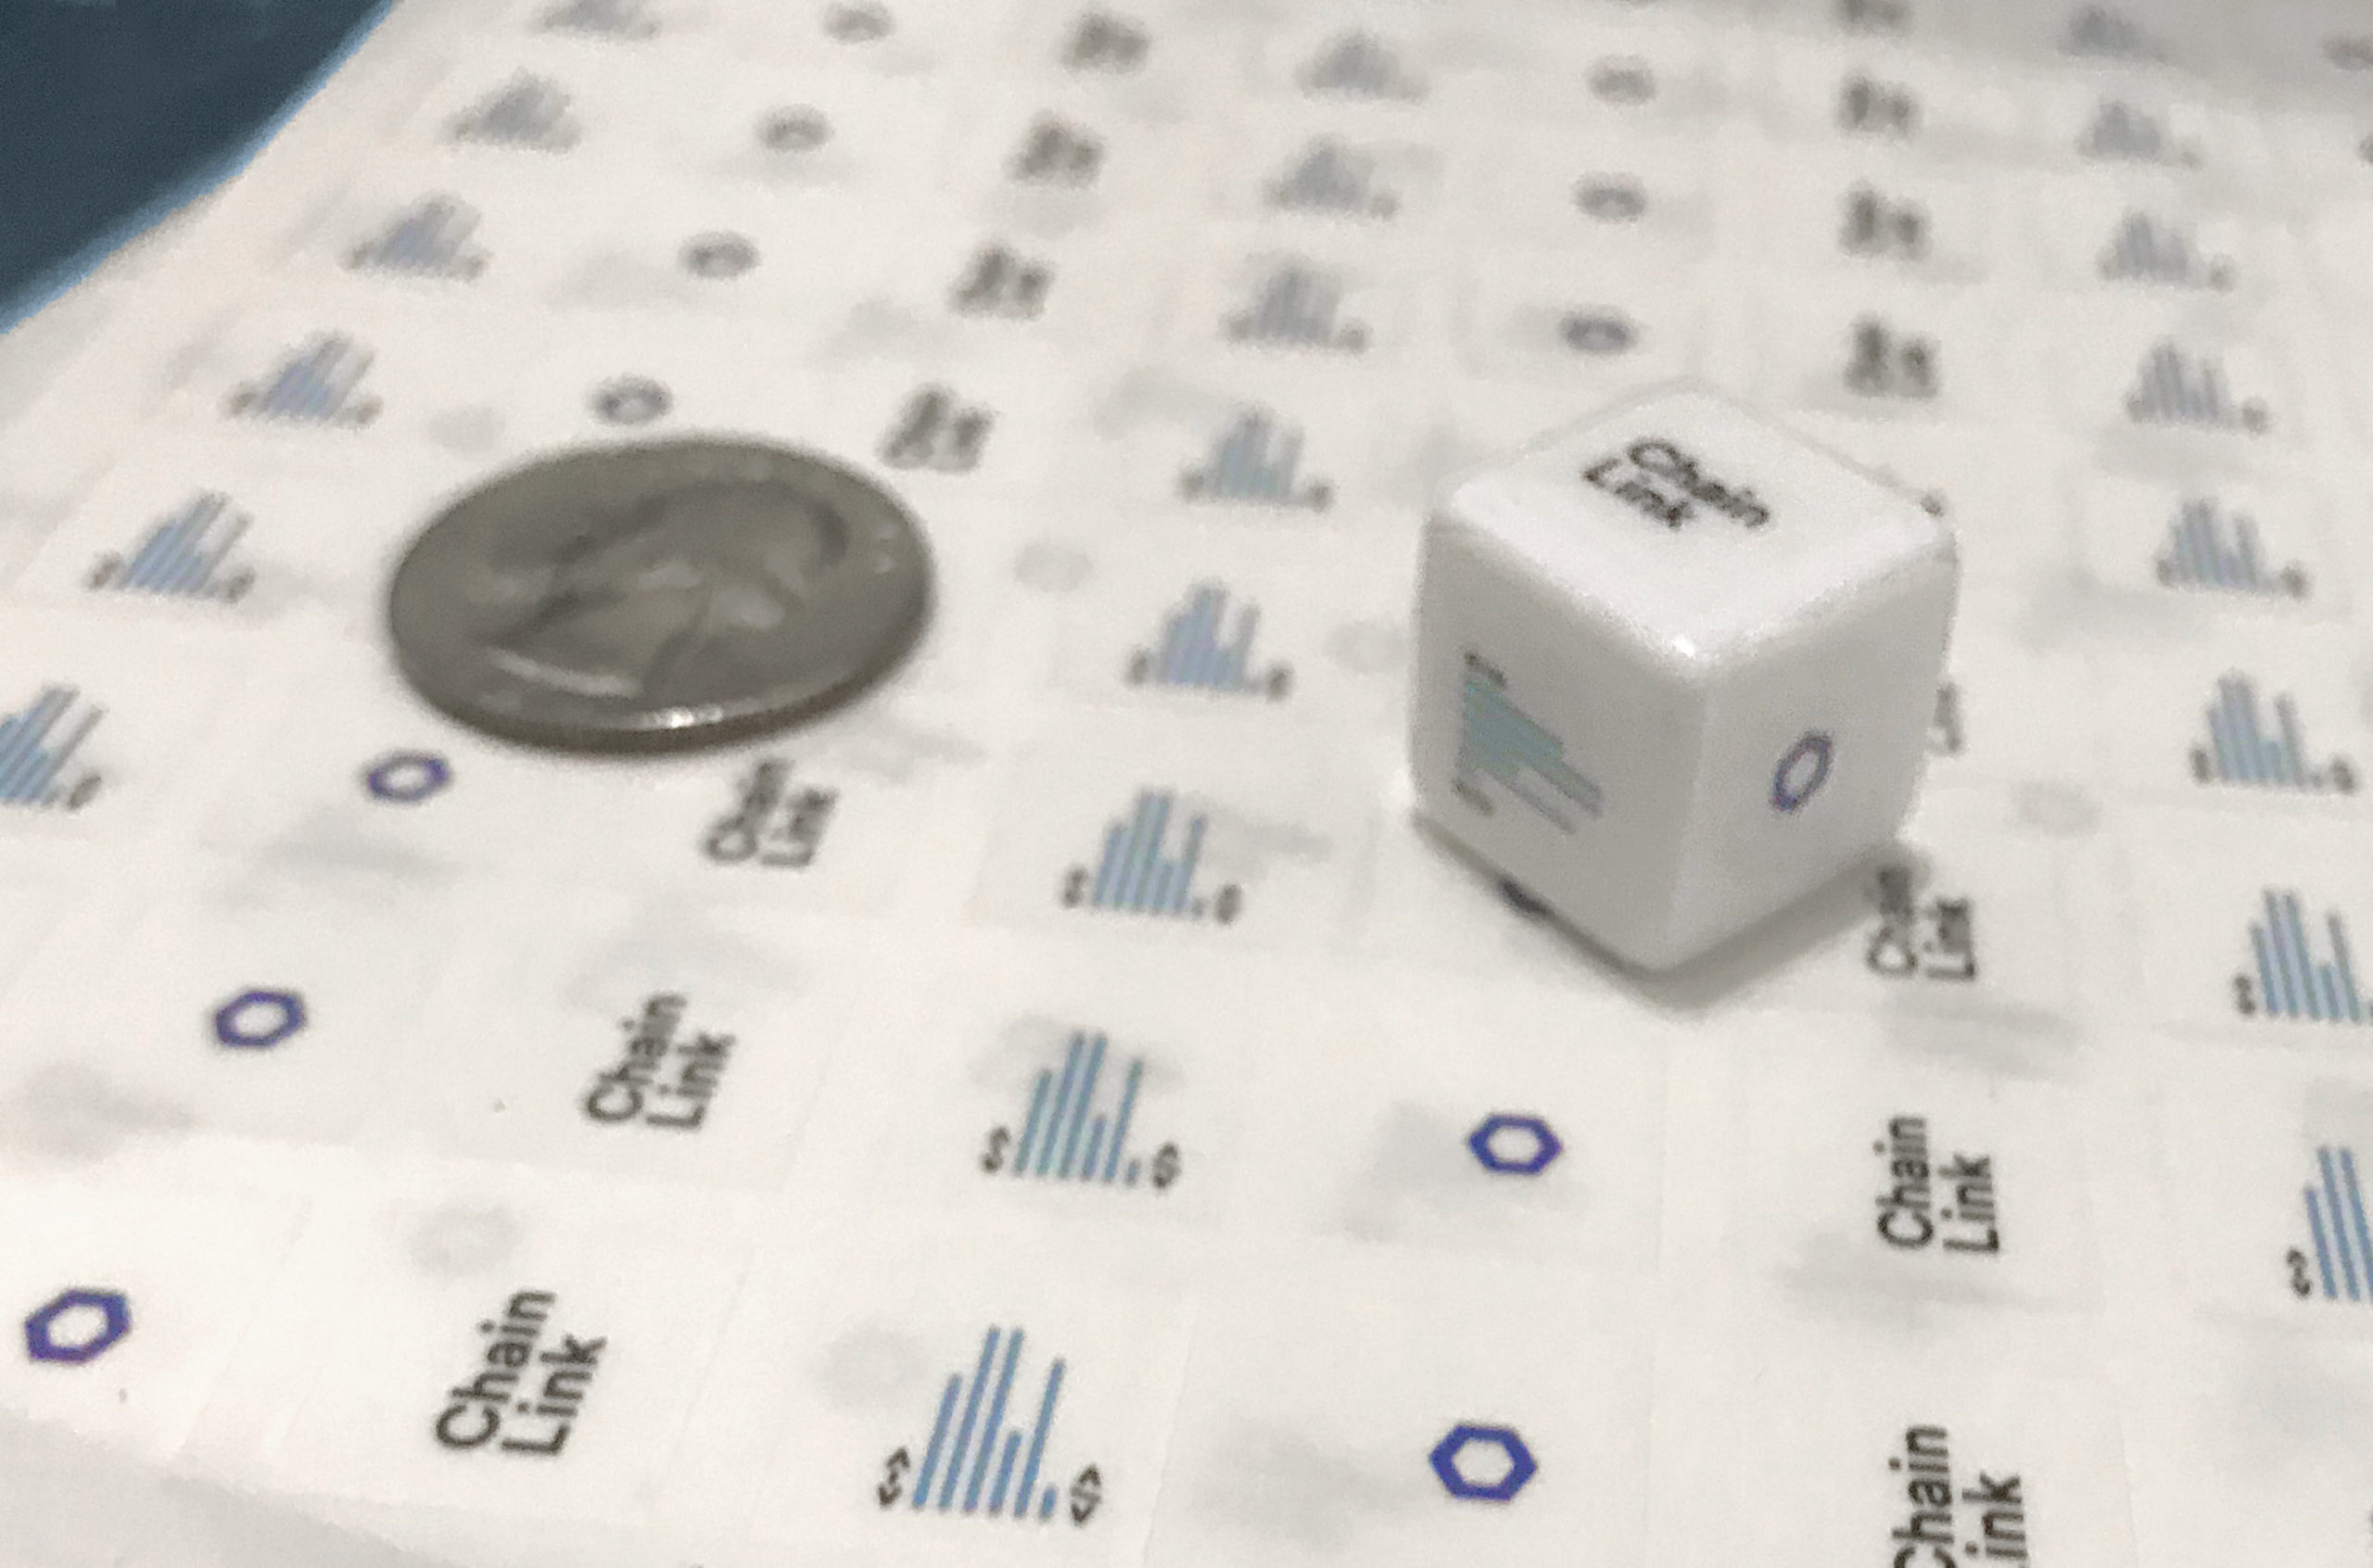 Chainlink dice cubes - aprox. 1.2 inch (16mm)